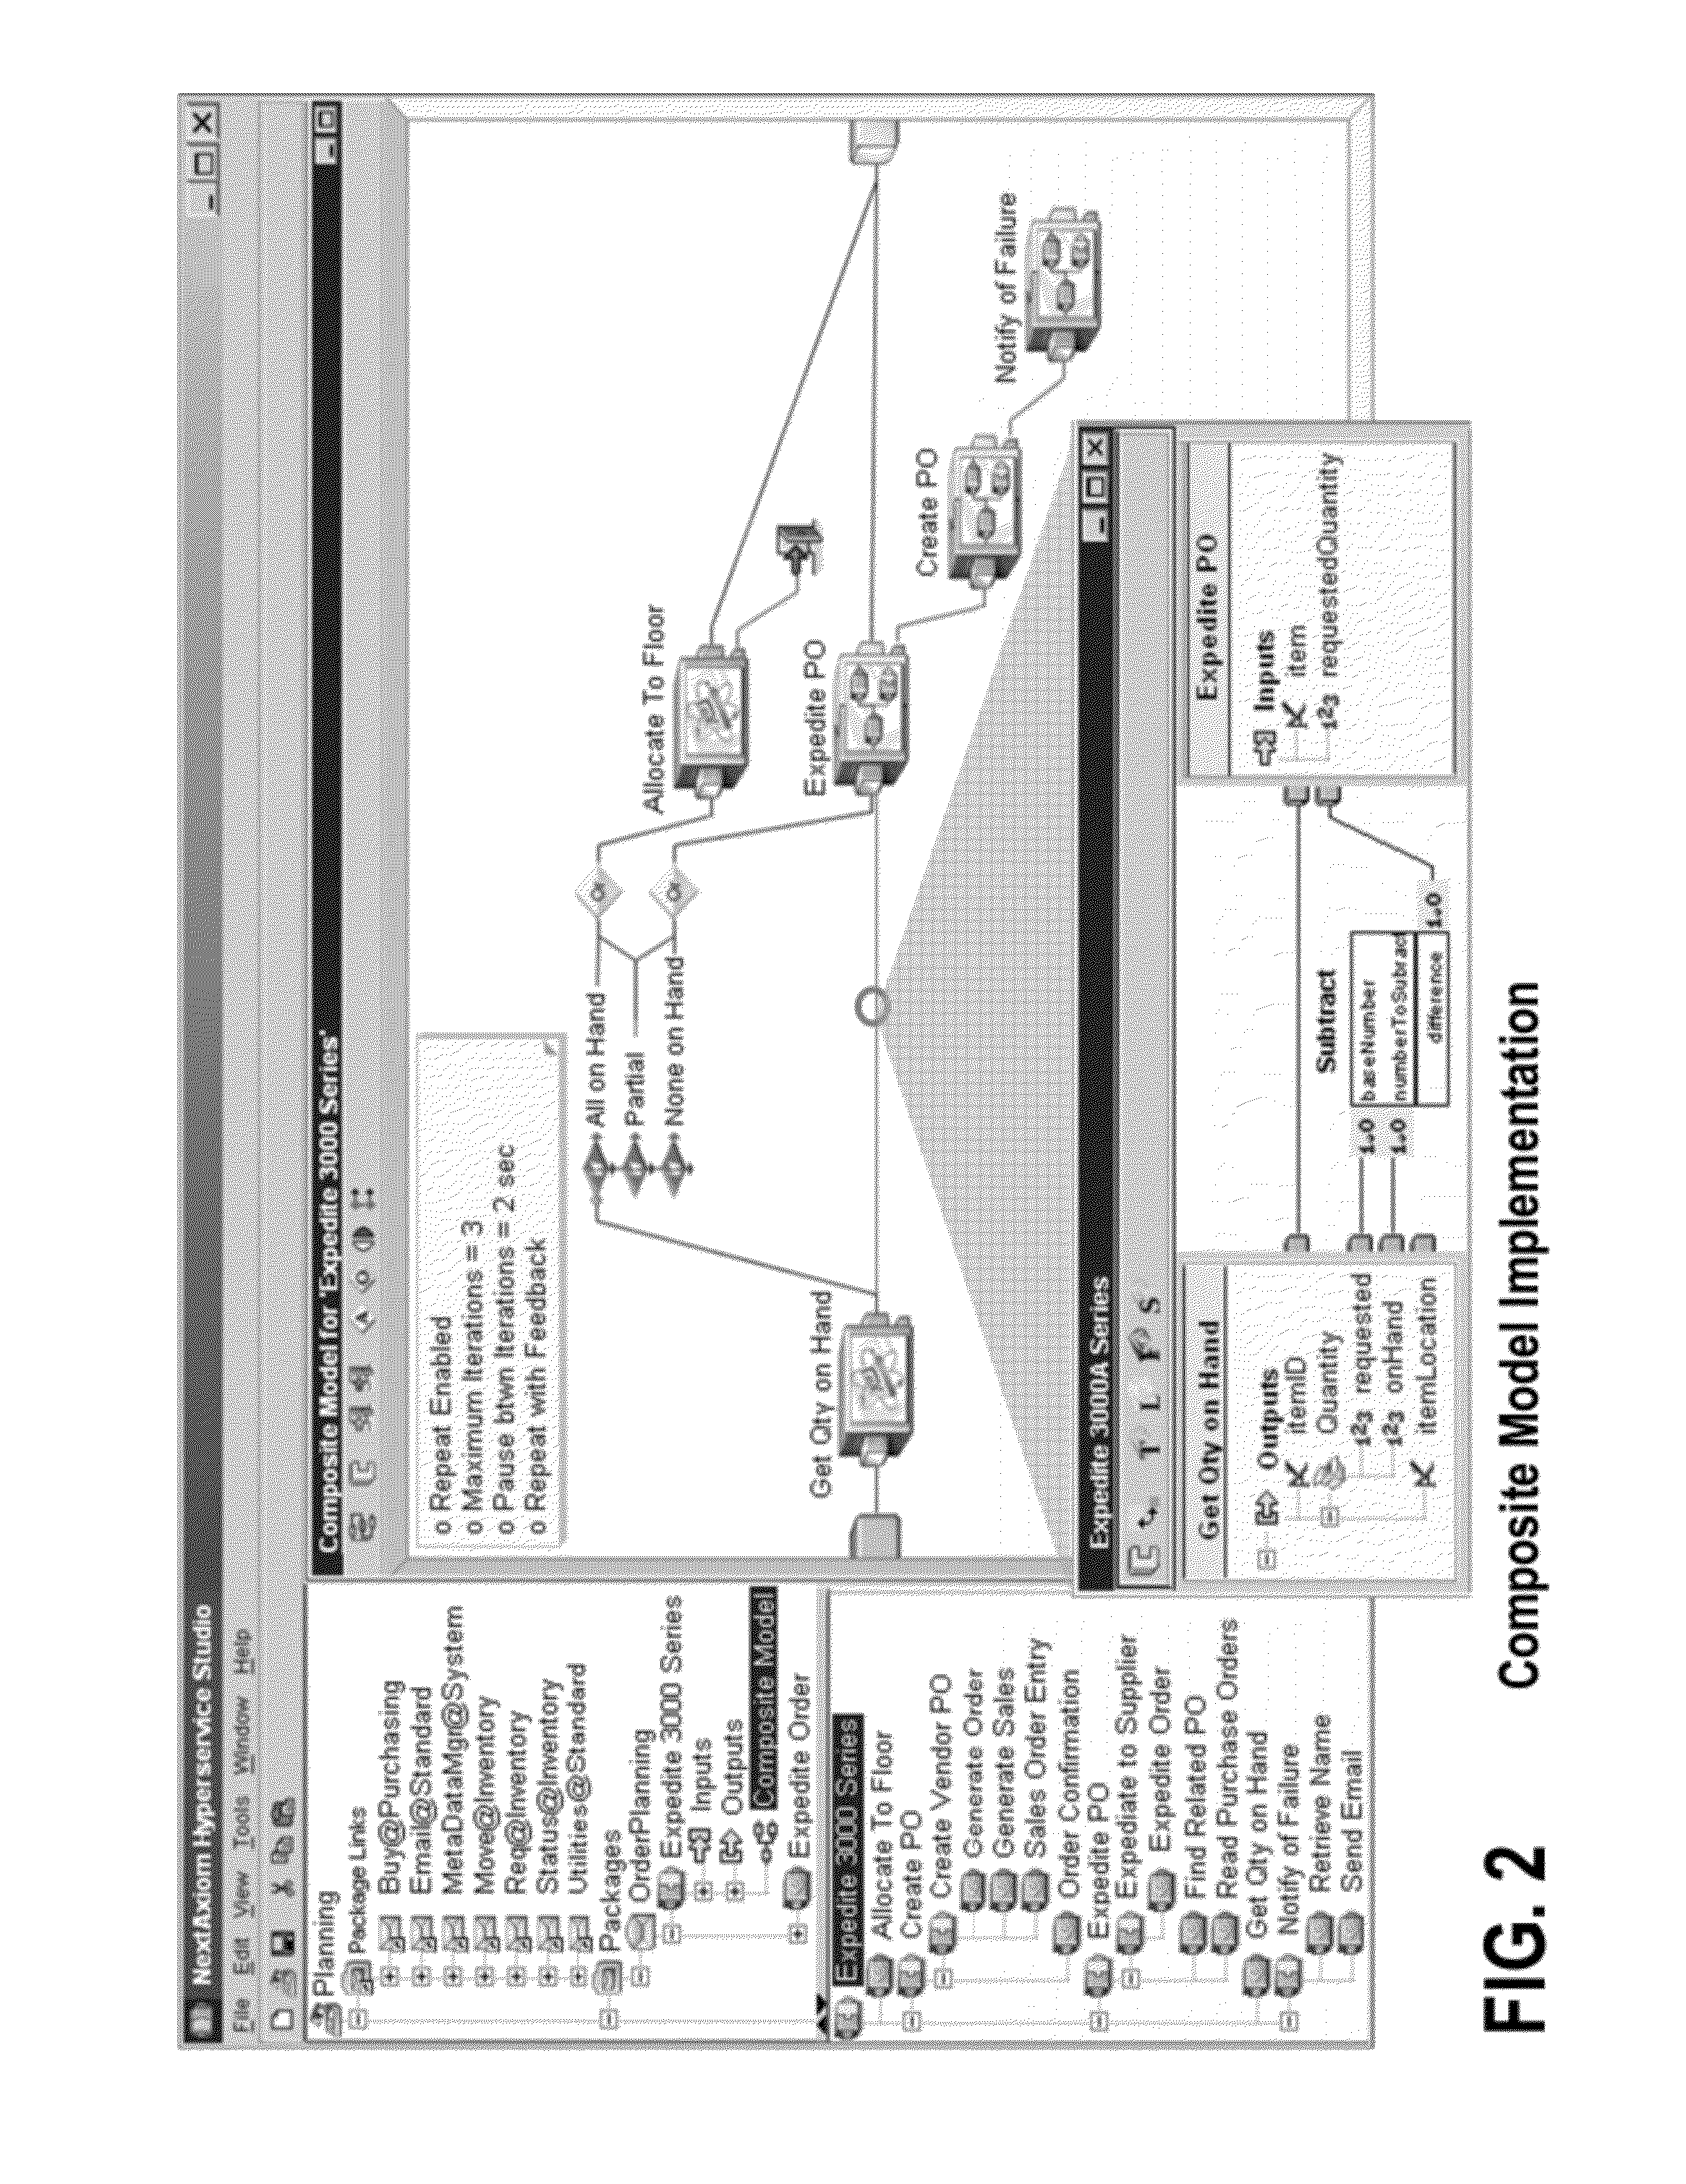 Semantic-based, service-oriented system and method of developing, programming and managing software modules and software solutions